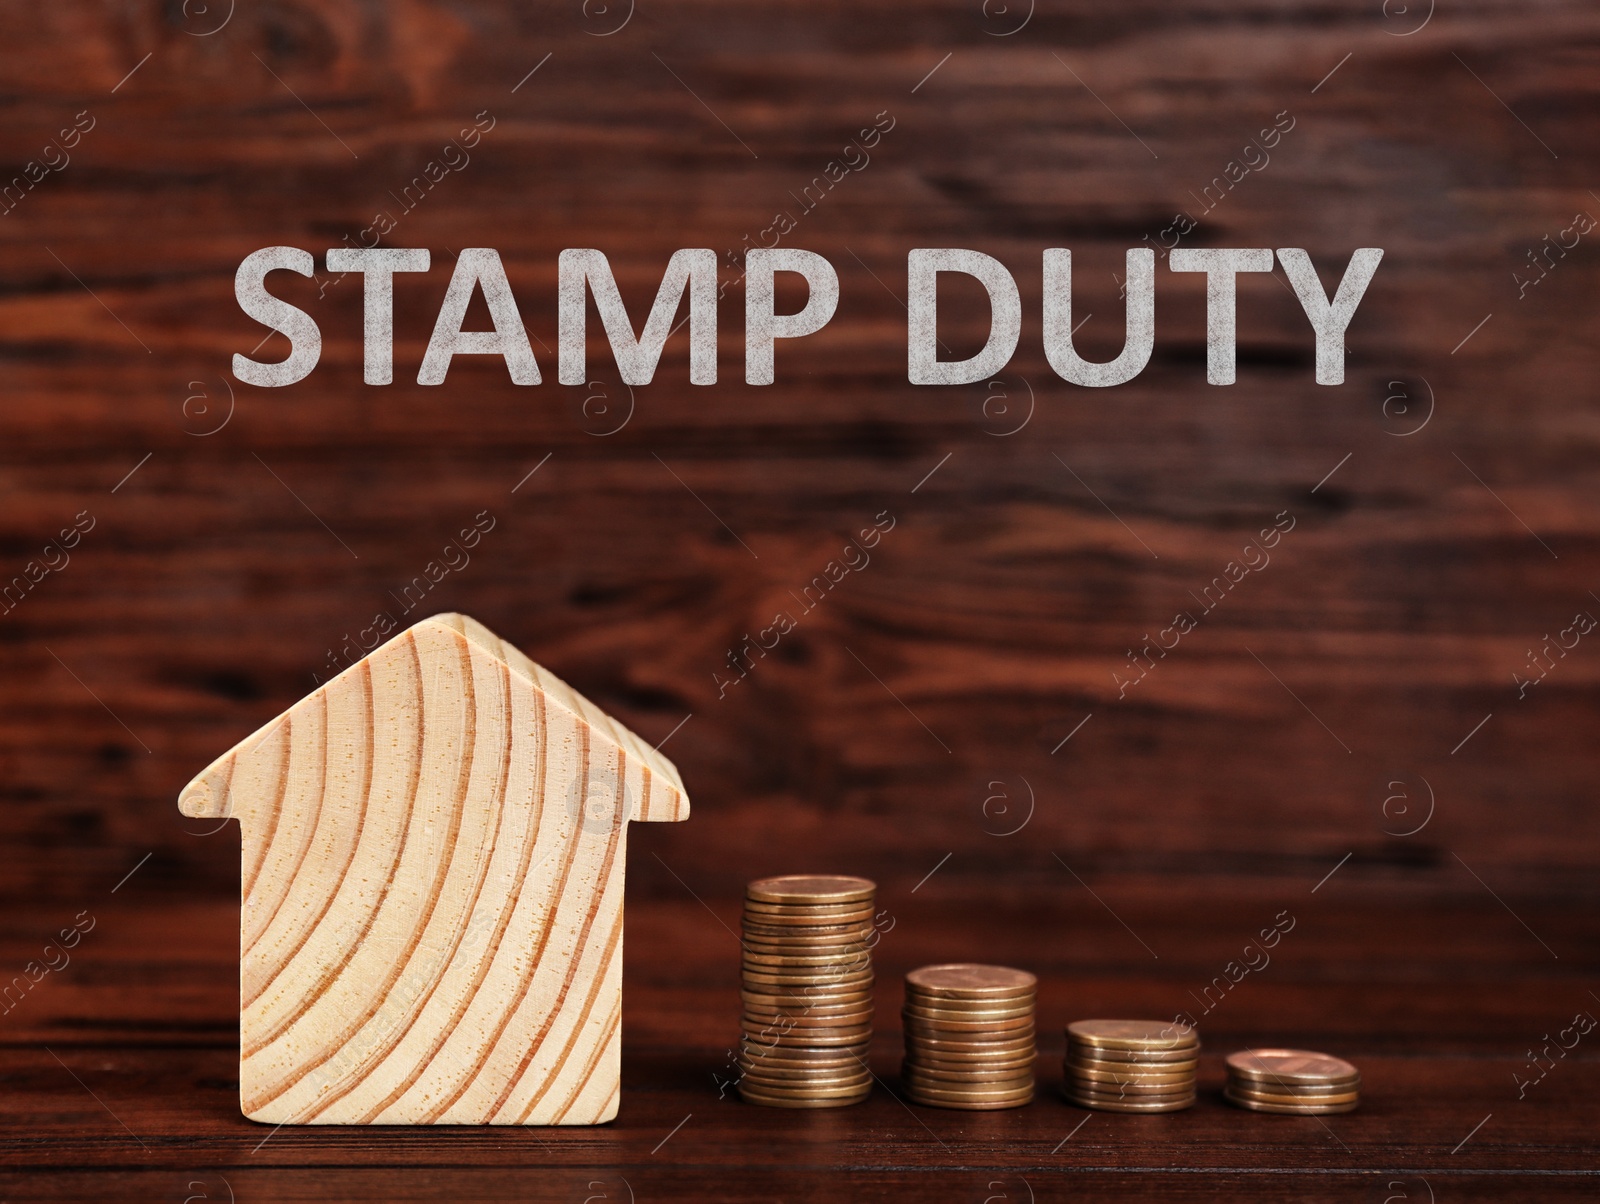 Image of Stamp duty. House model and coins on wooden background